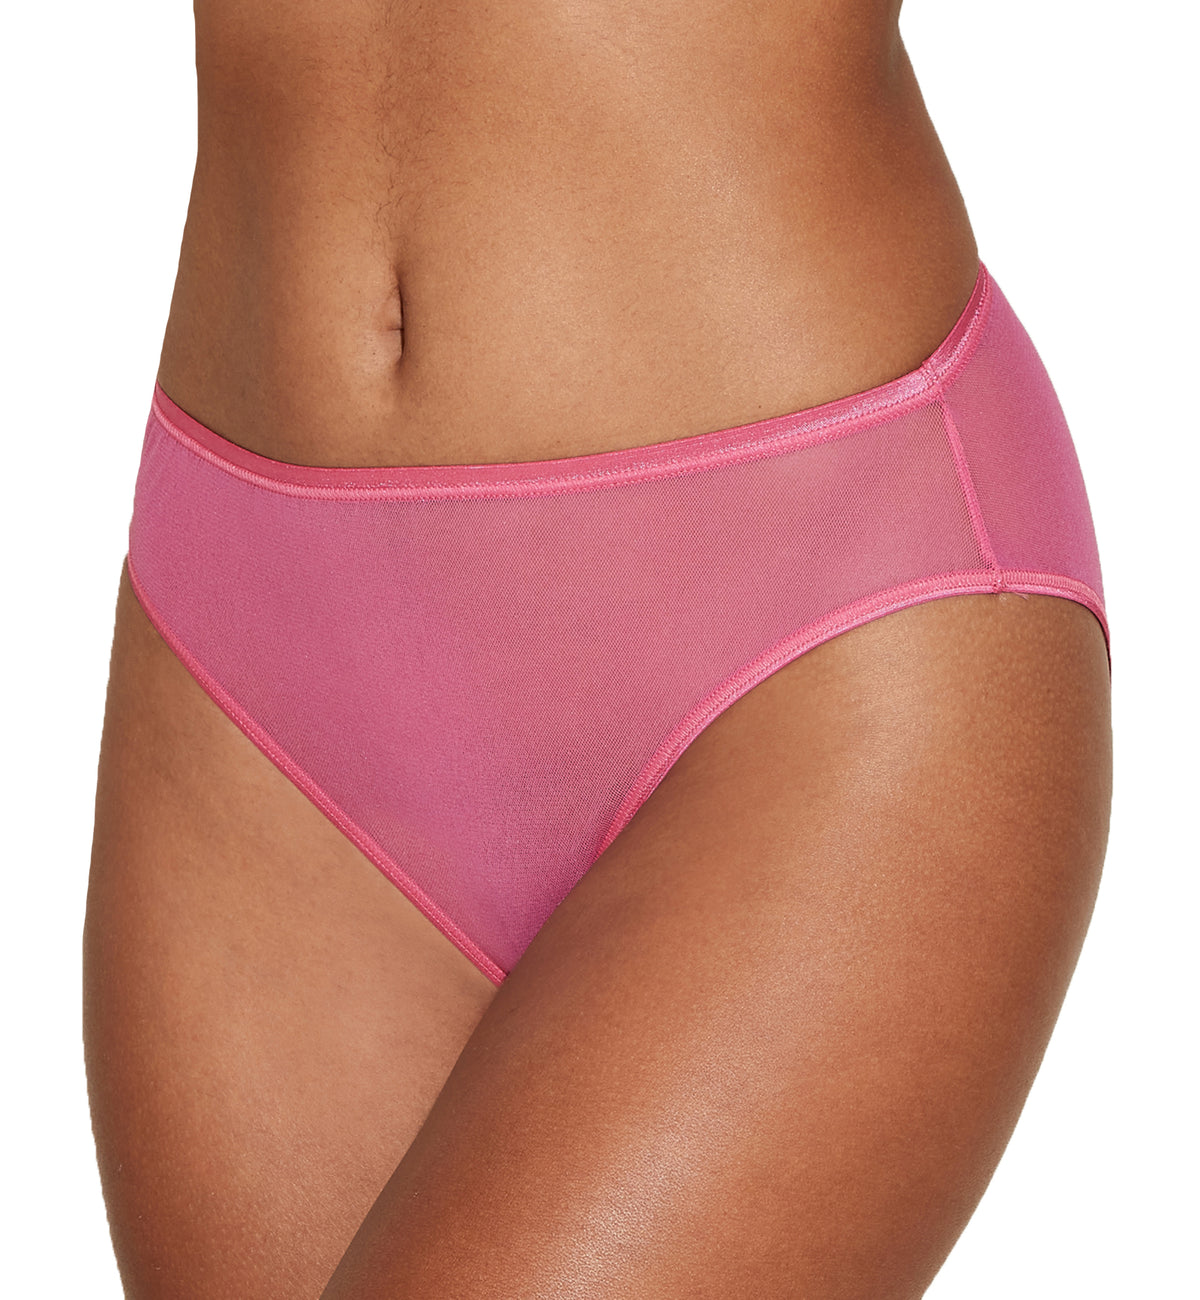 Cosabella Soire Confidence High Waist Brief Panty (SOIRC0562),Small,Rani Pink - Rani Pink,Small